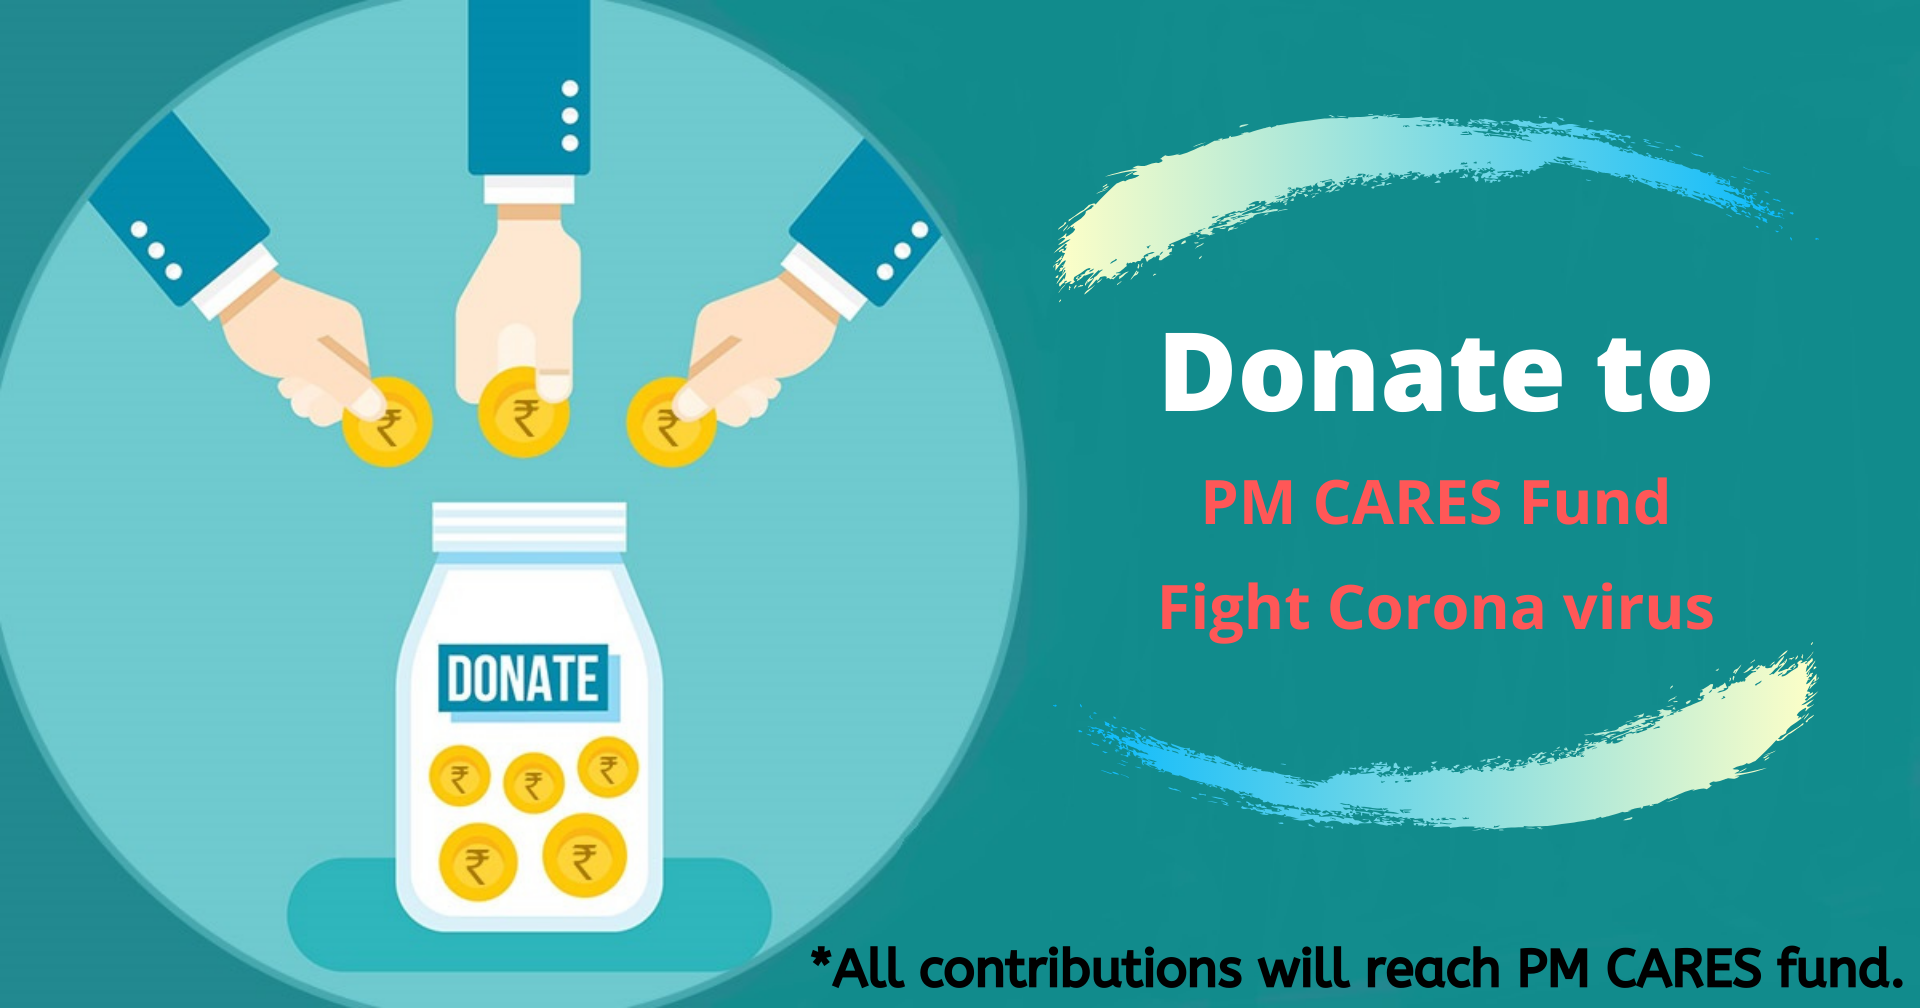 PM CARES - Fight against Covid-19